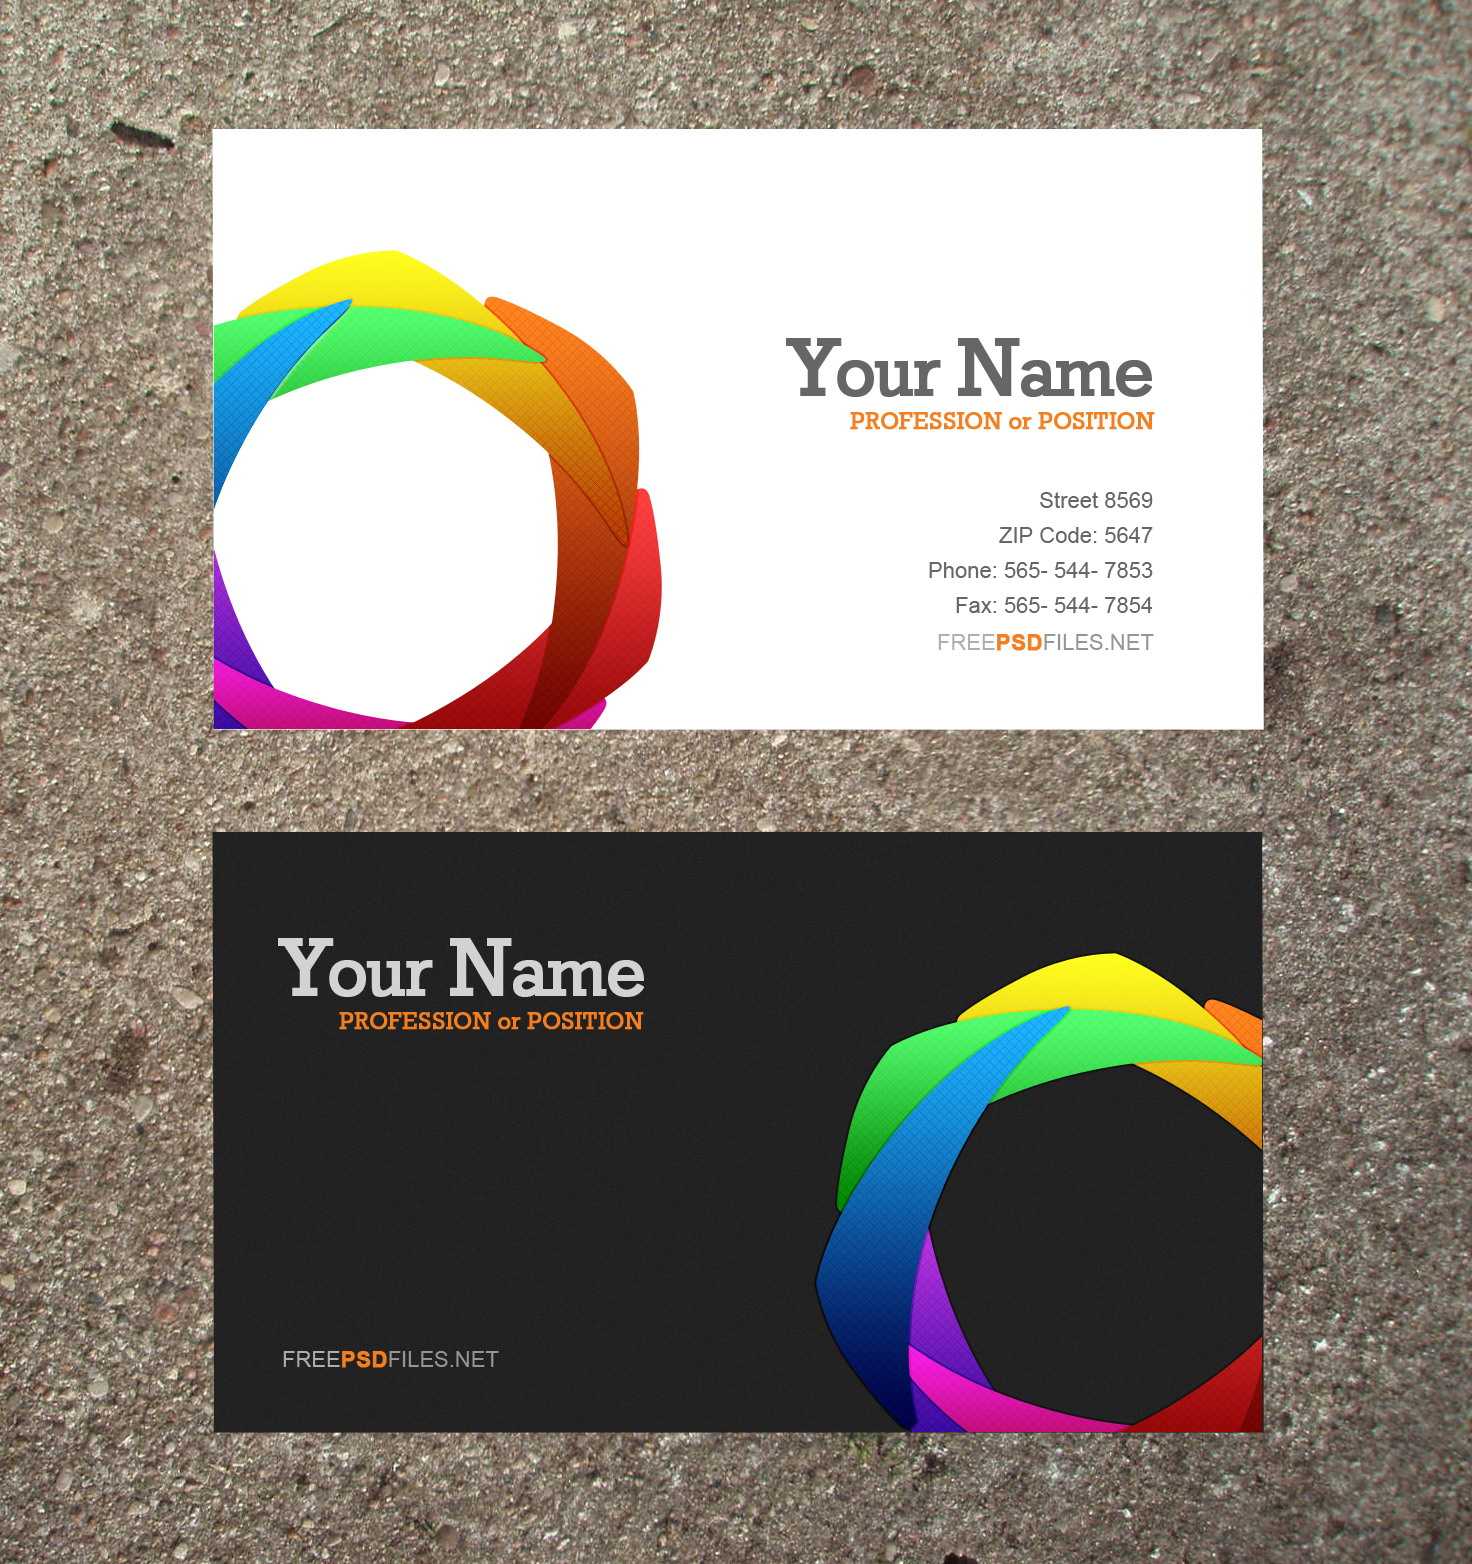 16 Business Card Templates Images – Free Business Card Pertaining To Free Business Cards Templates For Word